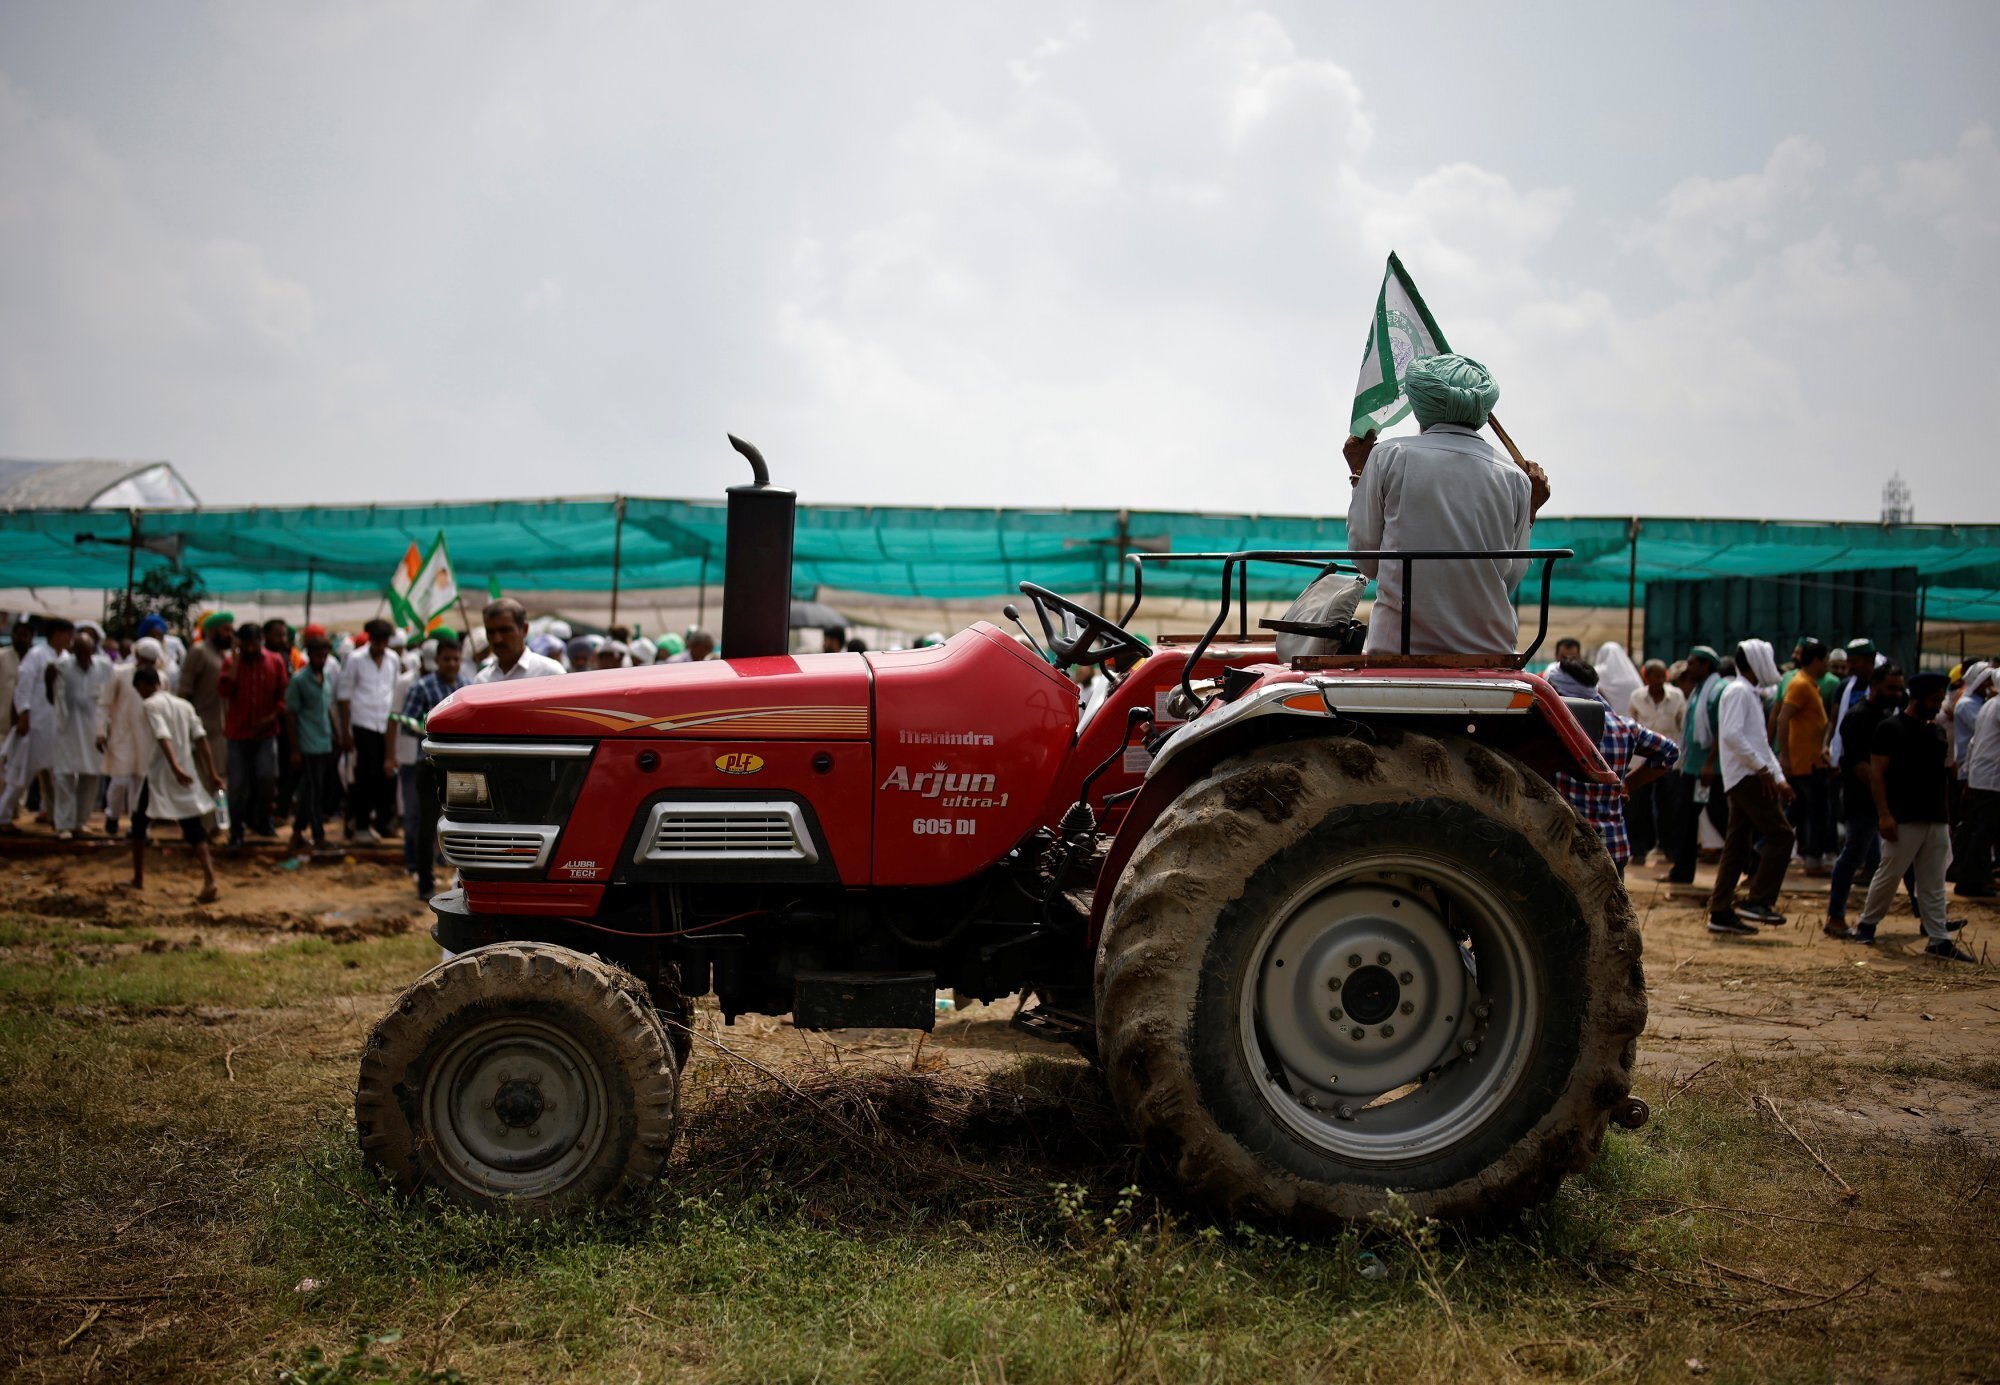 A farmer sits on a tractor as he attends a Maha Panchayat or grand village council meeting as part of a protest against farm laws in the northern state of Uttar Pradesh, India, in September 2021. Photo: Reuters